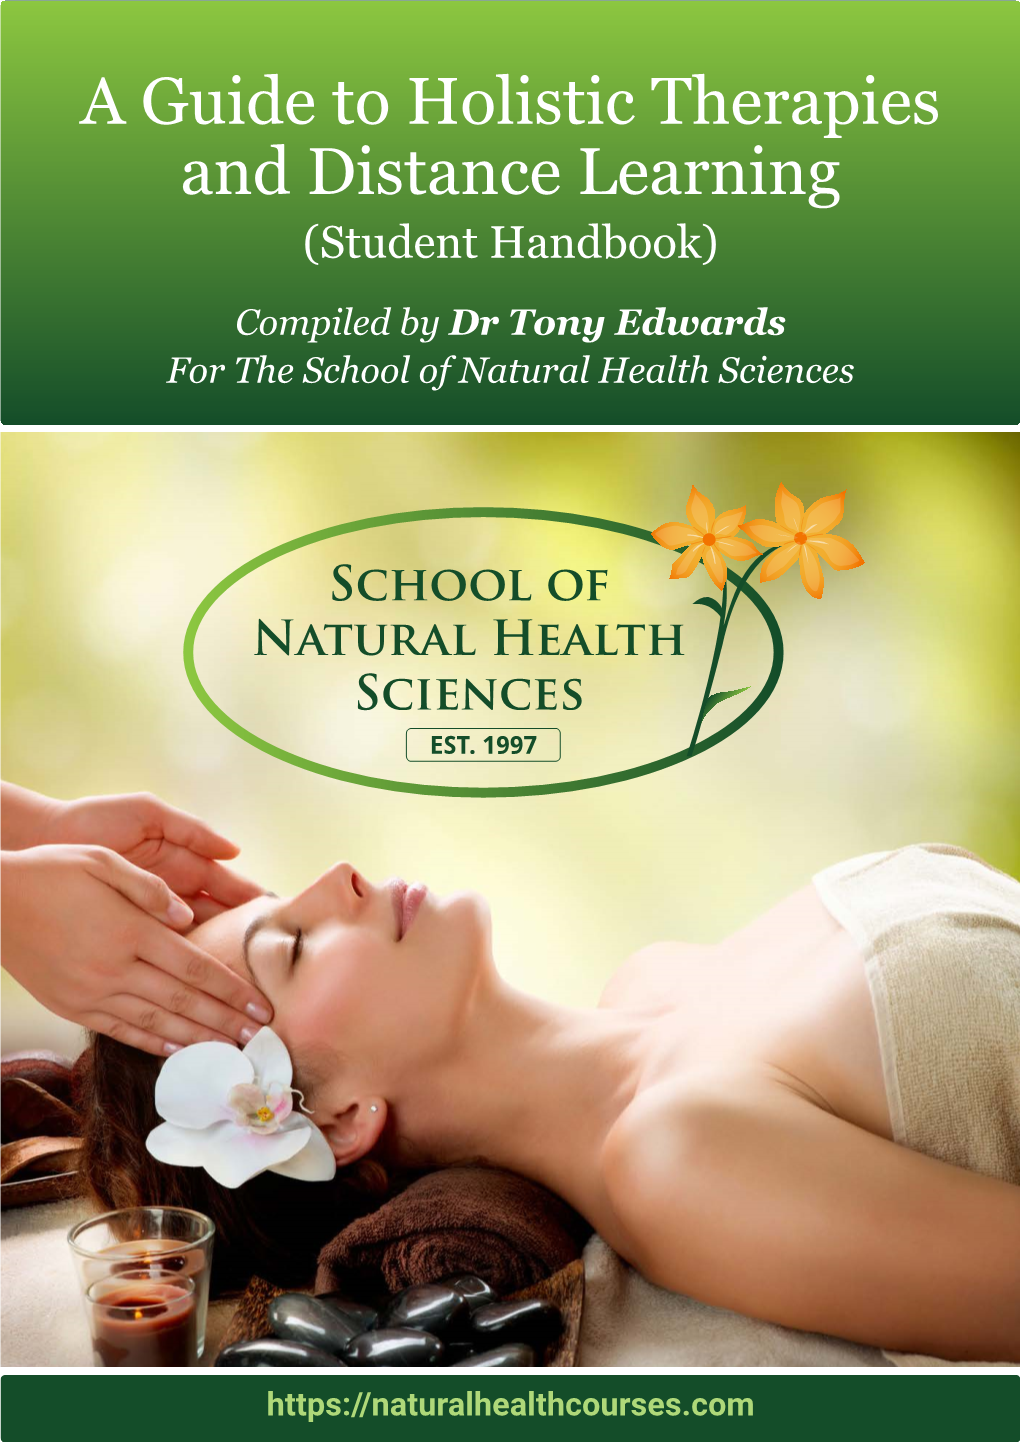 A Guide to Holistic Therapies and Distance Learning (Student Handbook)